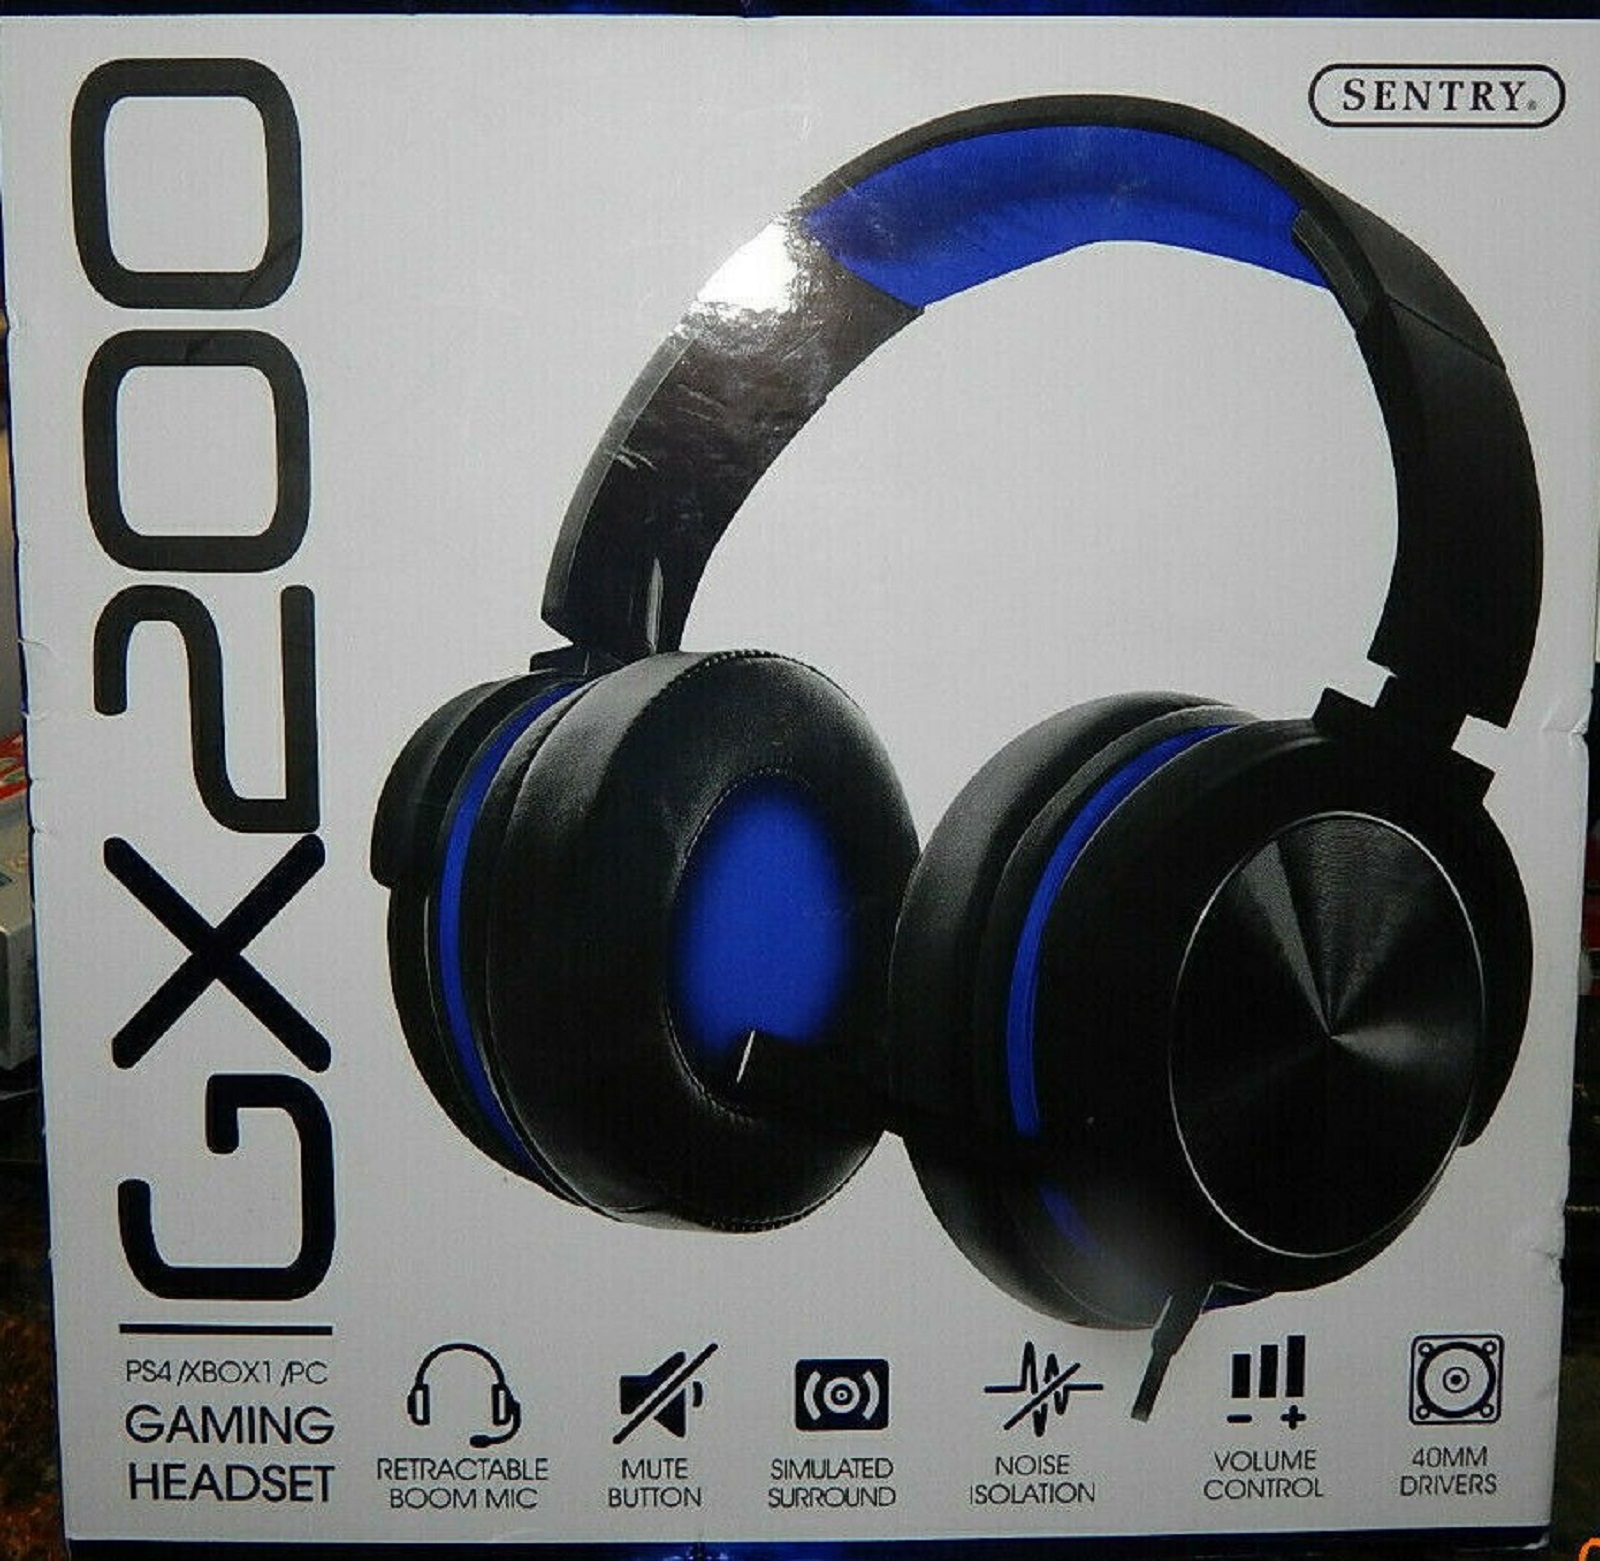 Sentry Gx0 Gaming Headset American Freight Sears Outlet